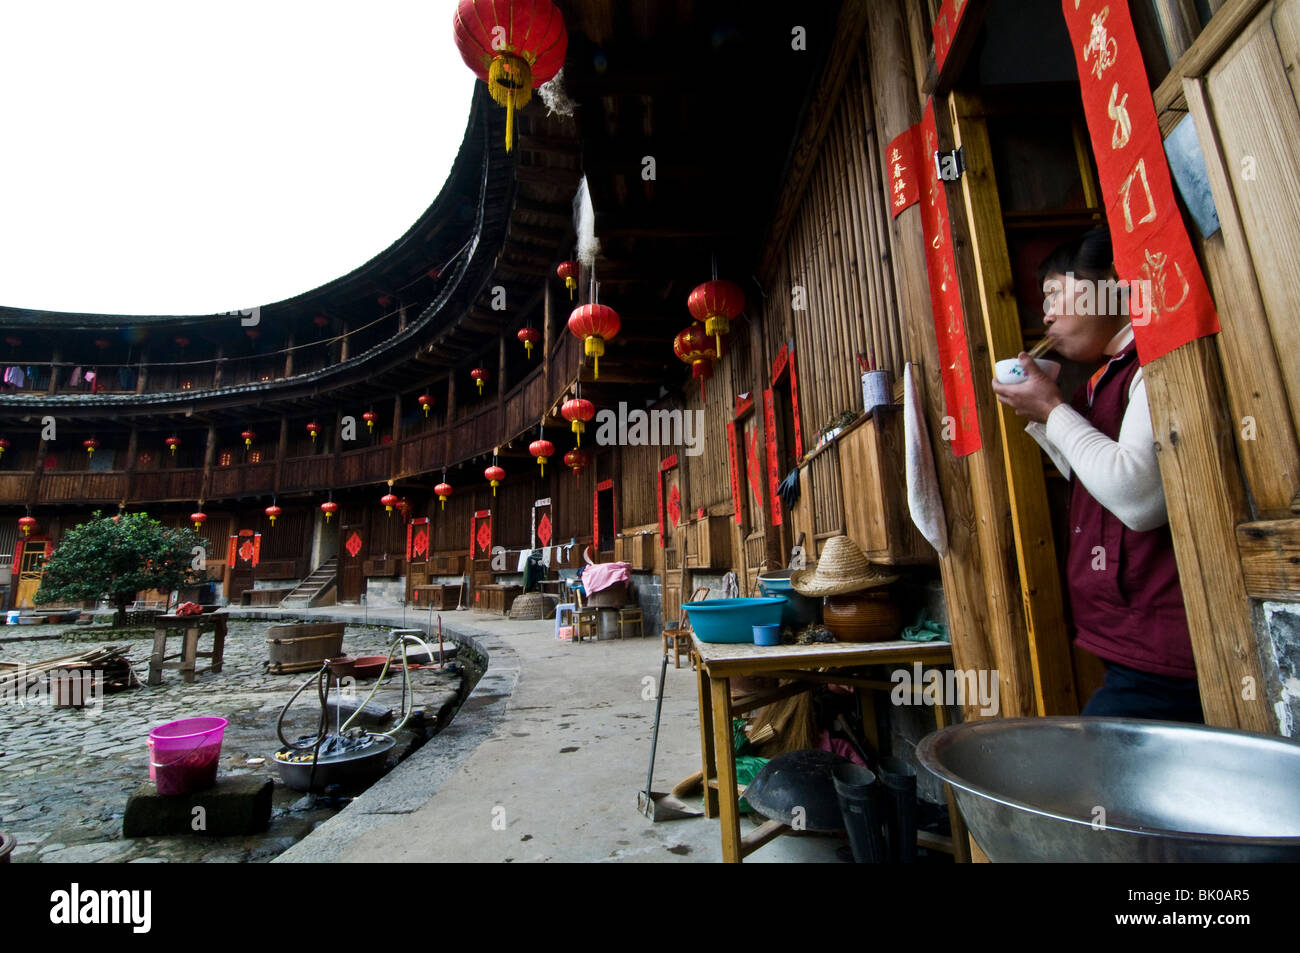 A view from inside a tulou . The Tulou are gigantic residential buildings  built by the Hakka people in Fujian. Stock Photo